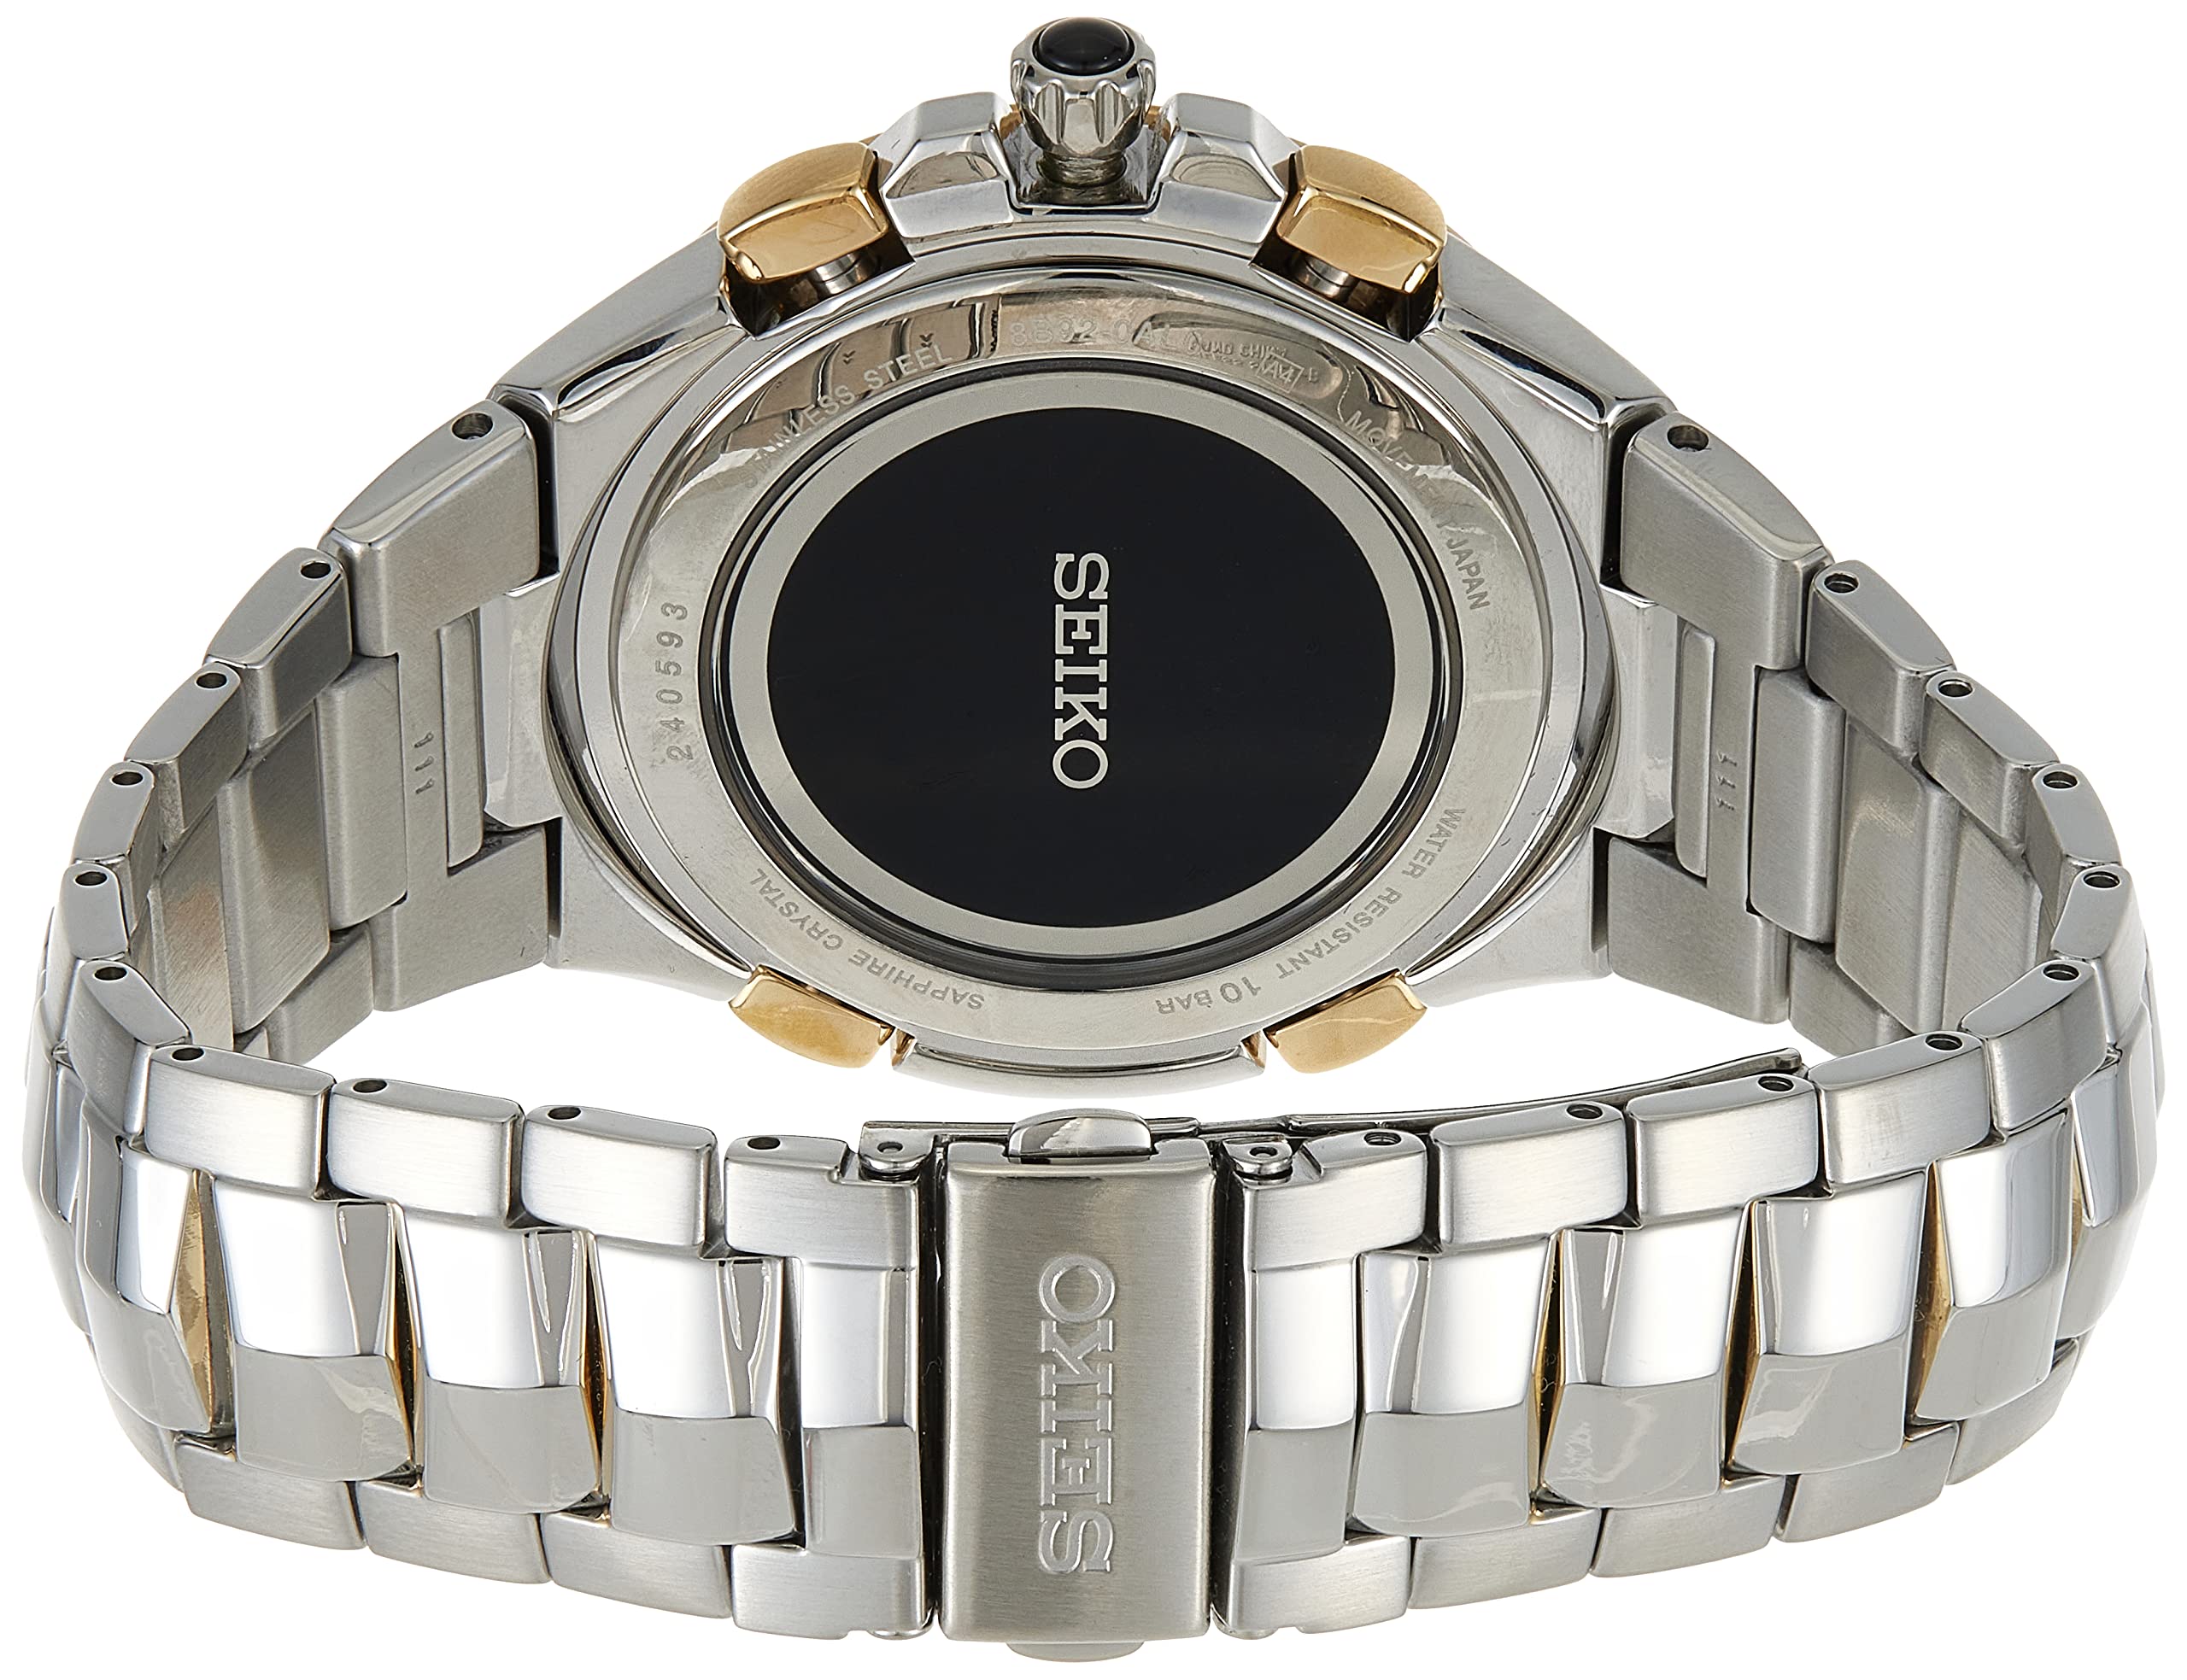 SEIKO SSG022 Watch for Men - Coutura Collection - Radio Sync Solar Chronograph, Two-Tone Case & Bracelet with Gold Accents, Green Dial, and Date Calendar